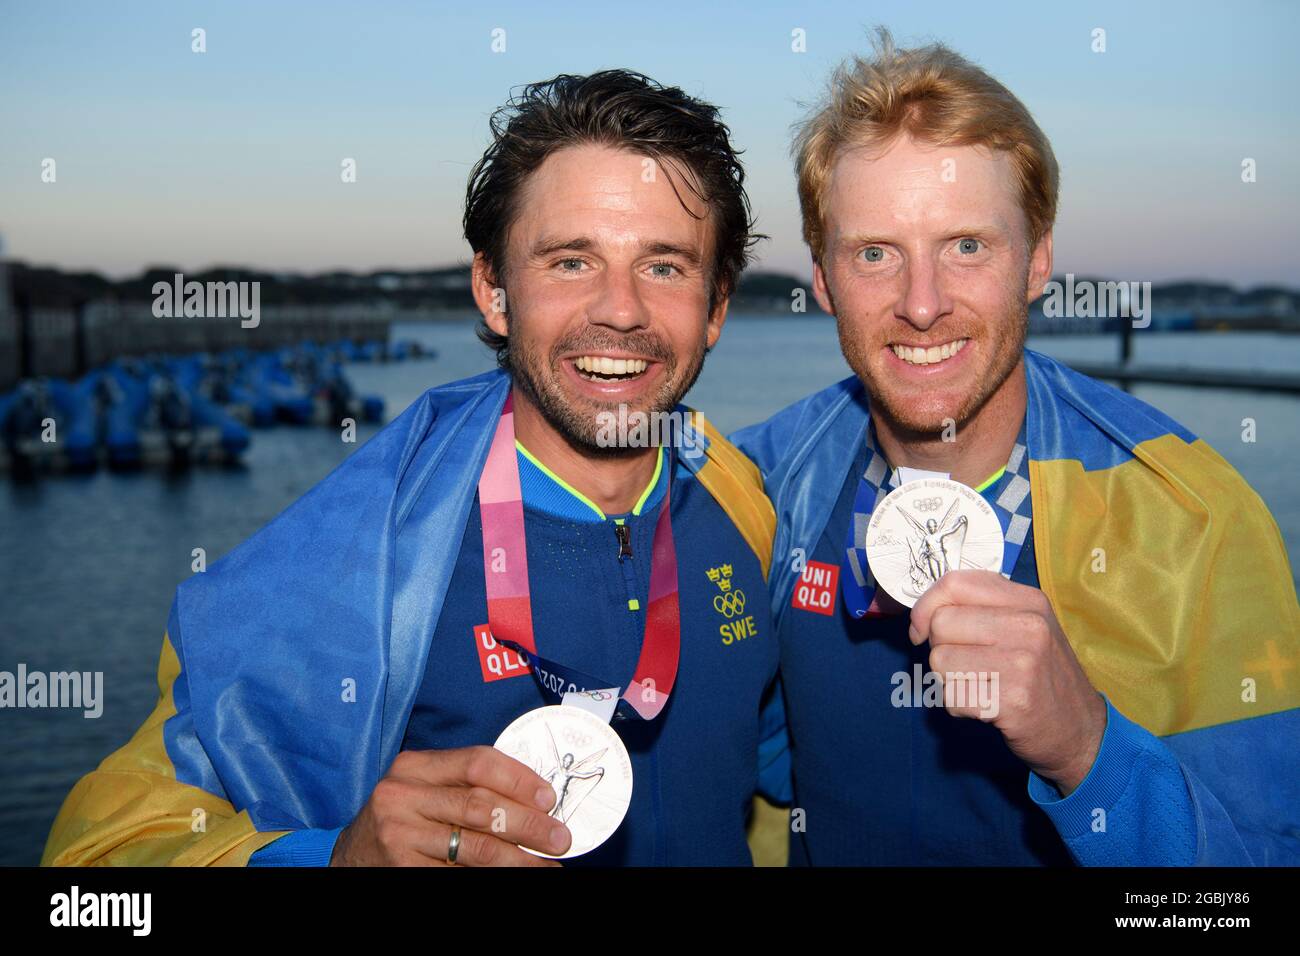 Team Sweden - Anton Dahlberg and Fredrik Bergström  (silver medal),  August 4th, 2021 - Sailing : Men's Two Person Dinghy - 470 - Medal Ceremony during the Tokyo 2020 Olympic Games at the Enoshima Yacht Harbour in Kanagawa, Japan. Tokyo Olympic Games 2020 - Sailing, Enoshima, Japan - 04 Aug 2021   (c)  Henrik Montgomery / TT / kod 10060 Stock Photo